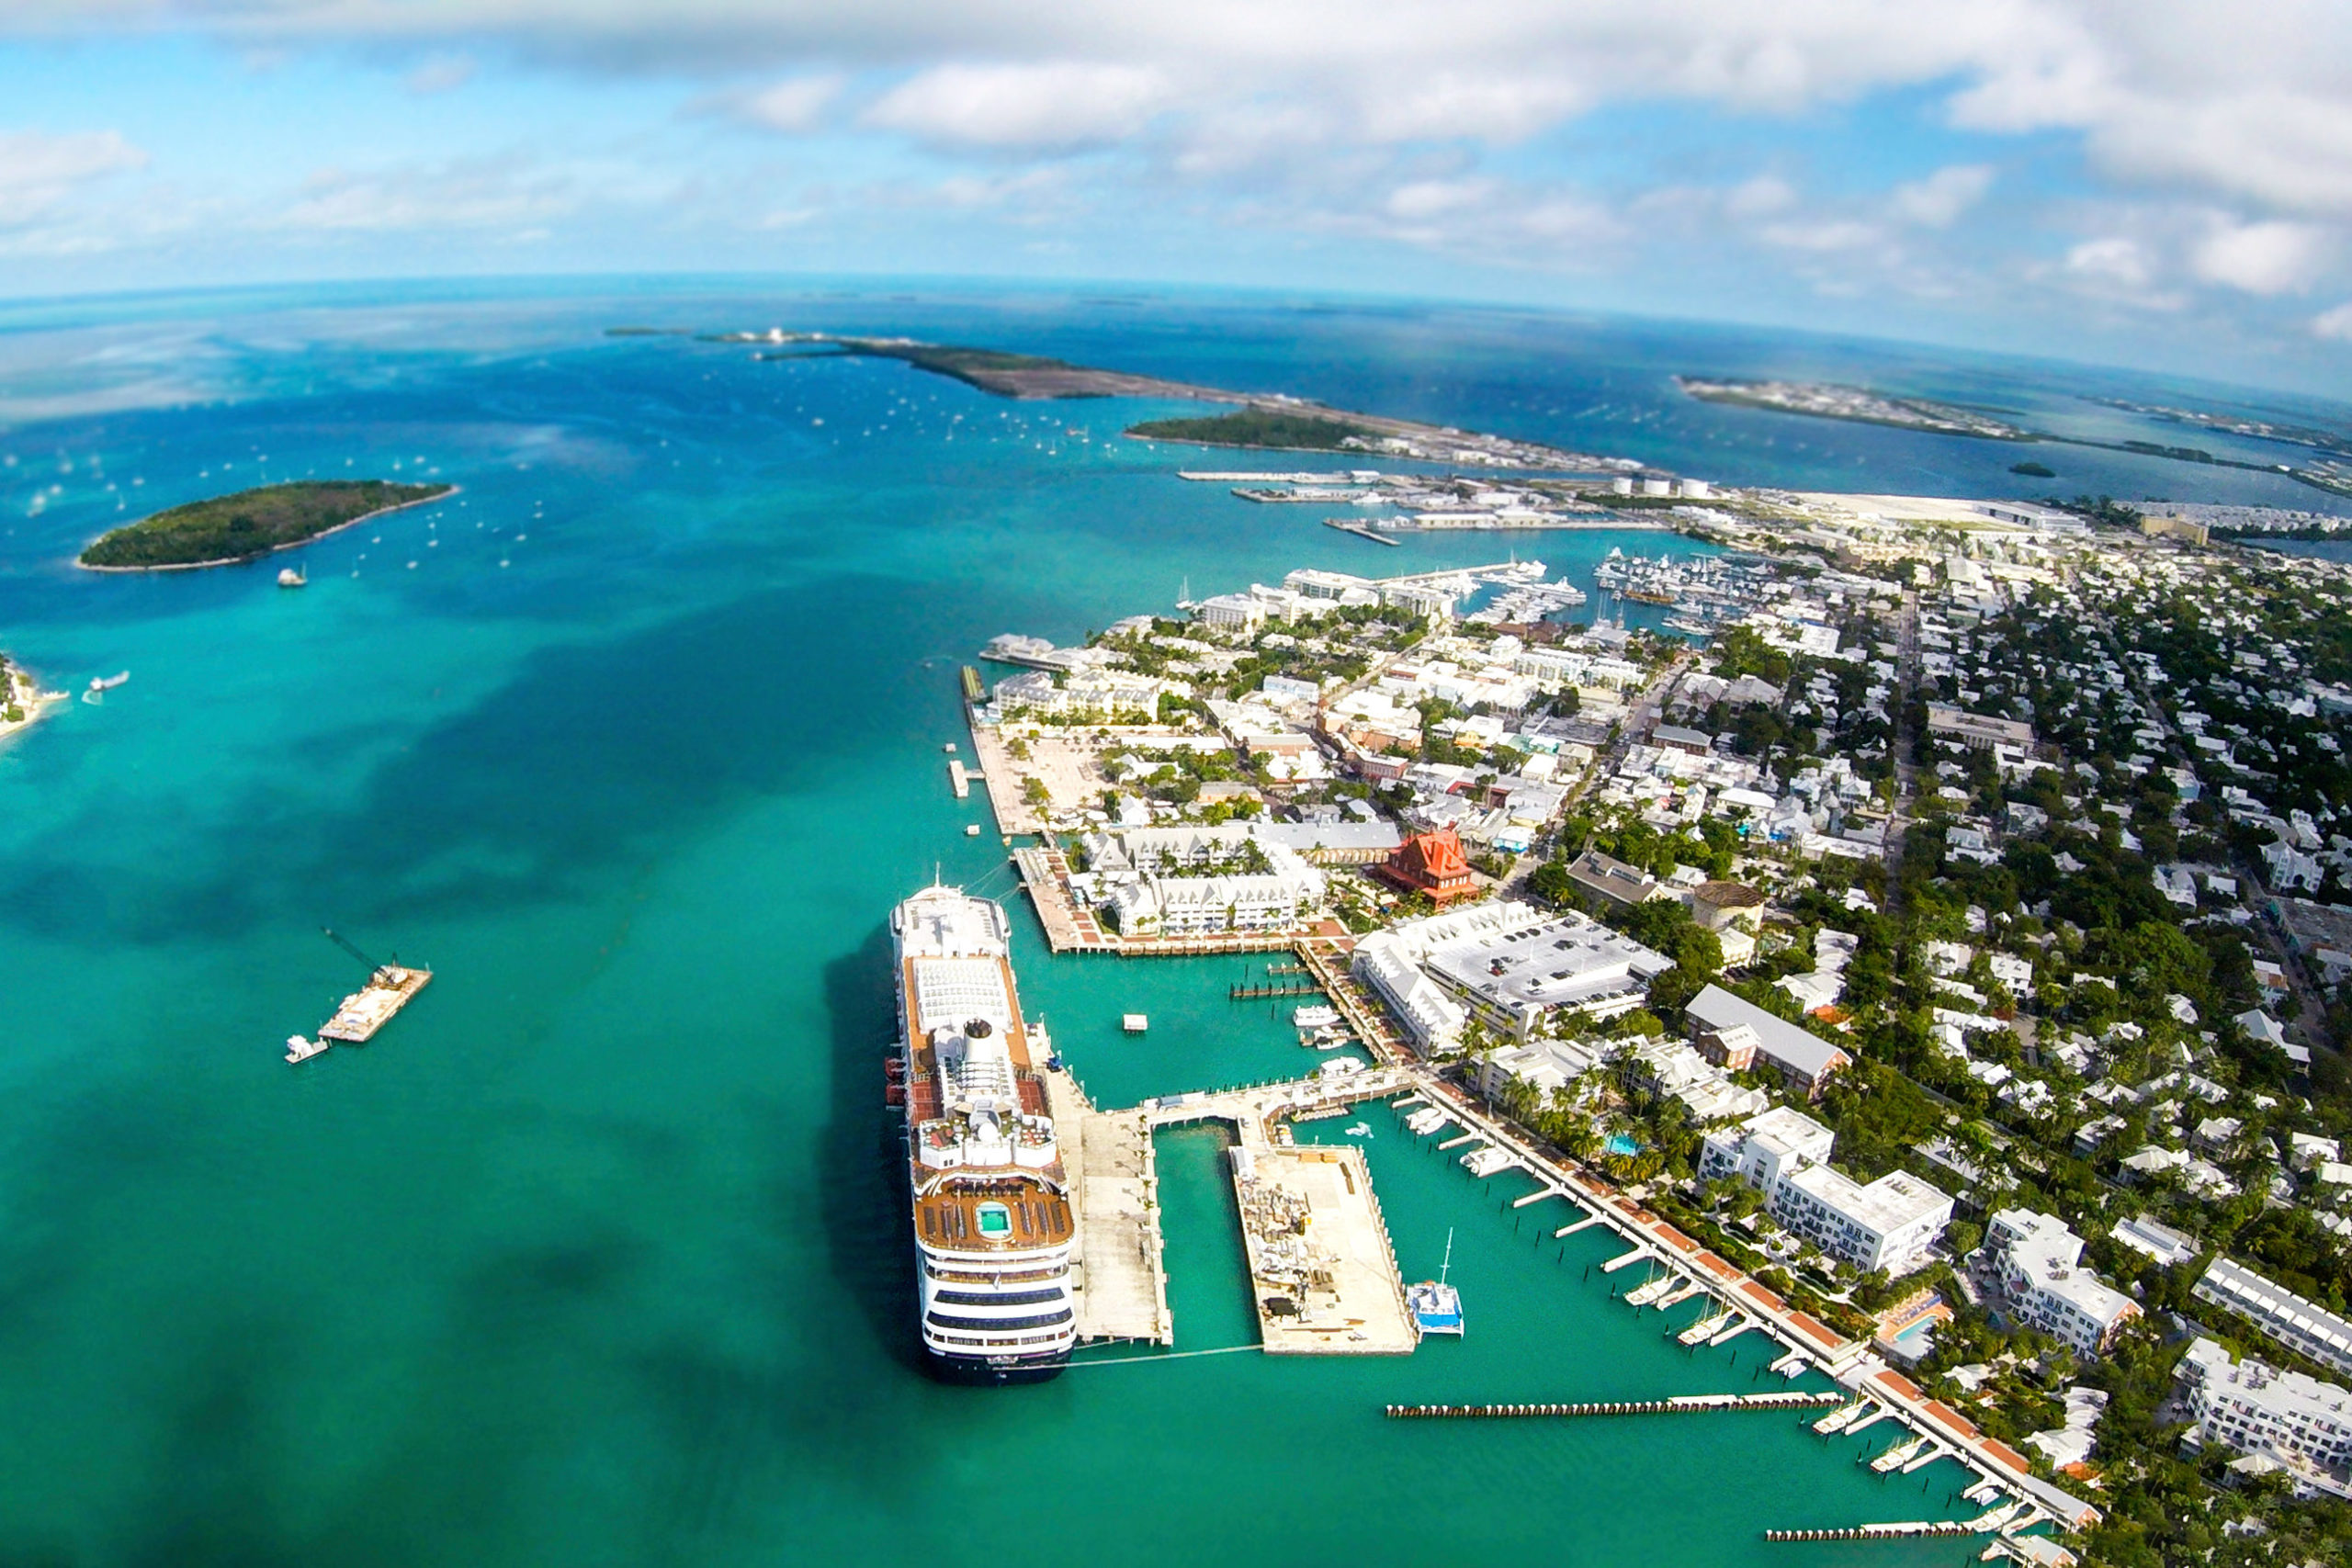 Aerial view of key west